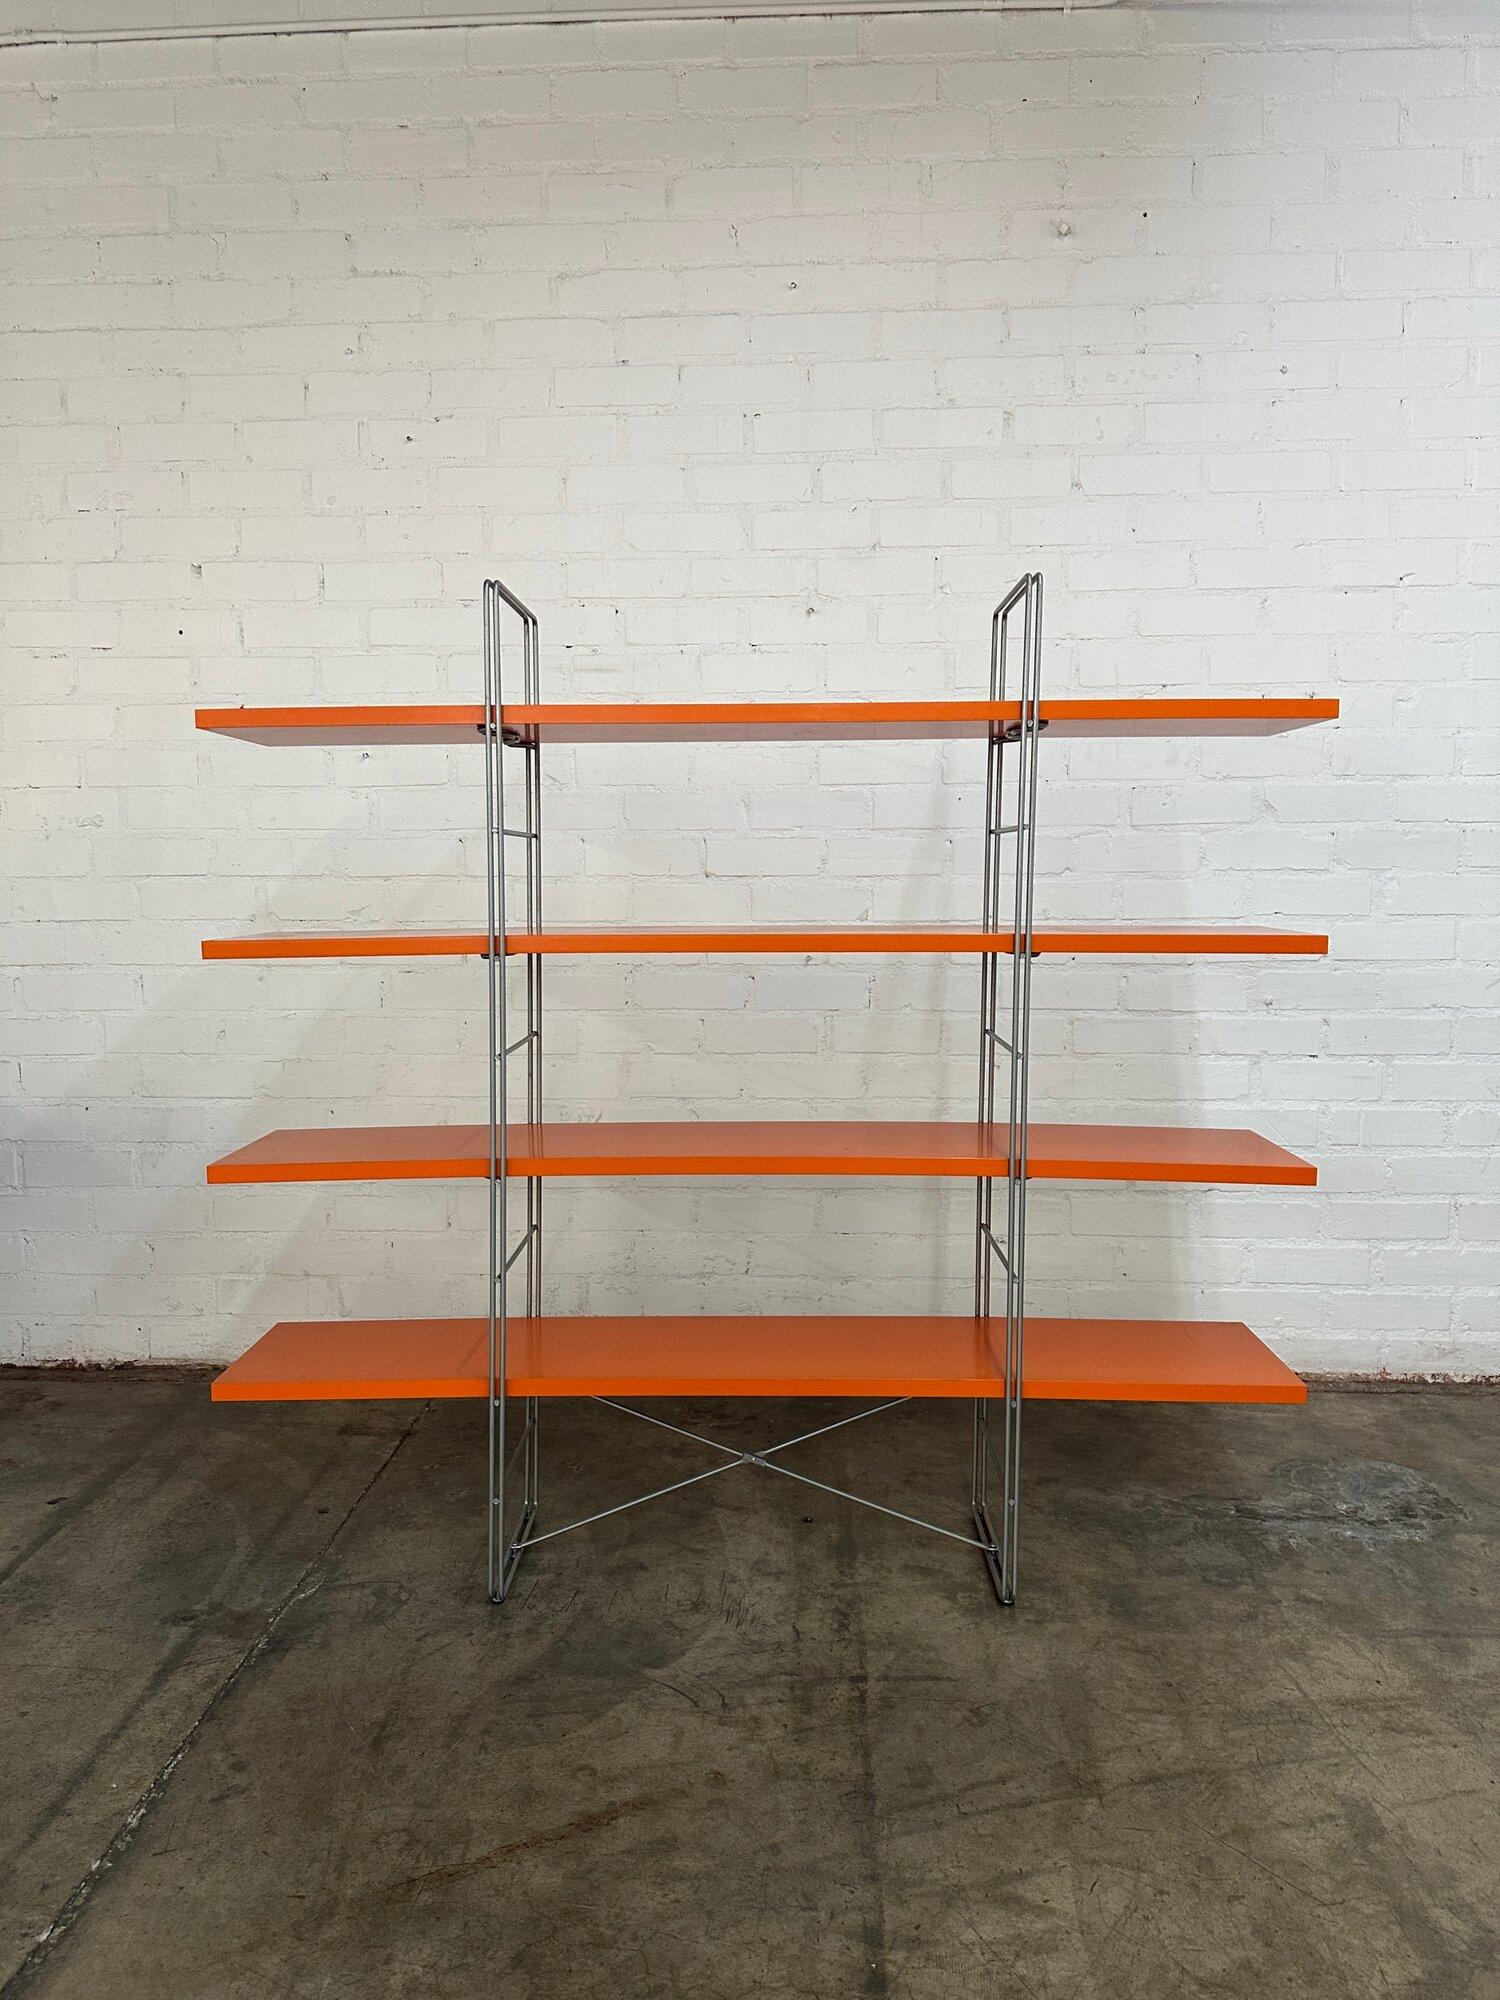 W67 H62.5 D14 Shelf Space 12.5

Rare Room divider or bookcase by Niels Gammelgaard for Ikea circa 1990s. Bookcase features rare orange laminate shelves. Shows well overall with no major wear. Item is sound with no breaks or chips visible to metal